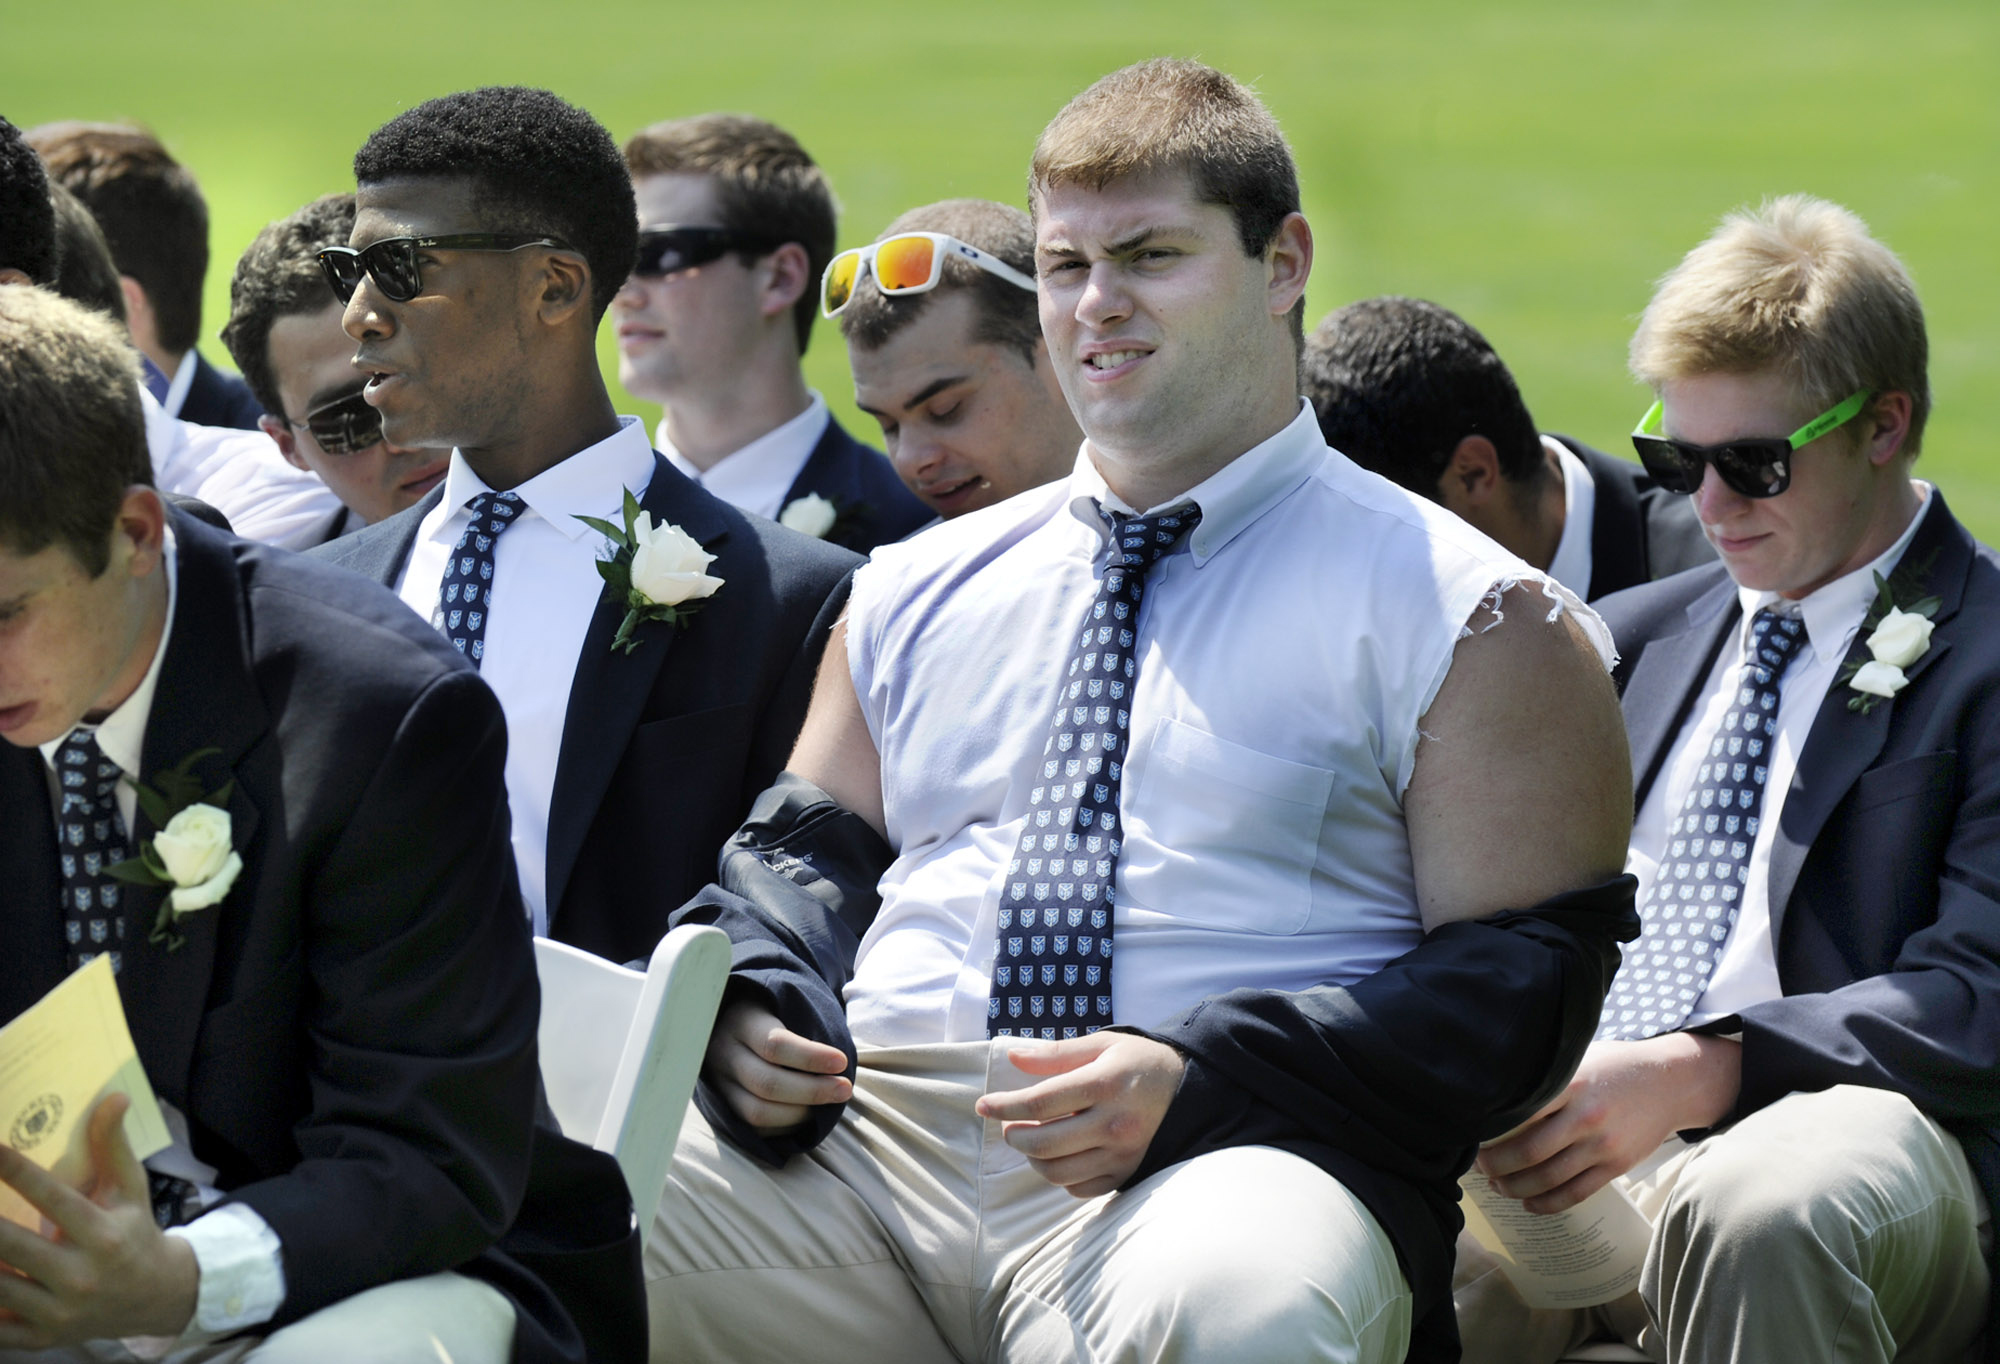 This student had a plan to beat the heat at his prep school graduation ceremony, wearing a dress shirt with cut off sleeves. 